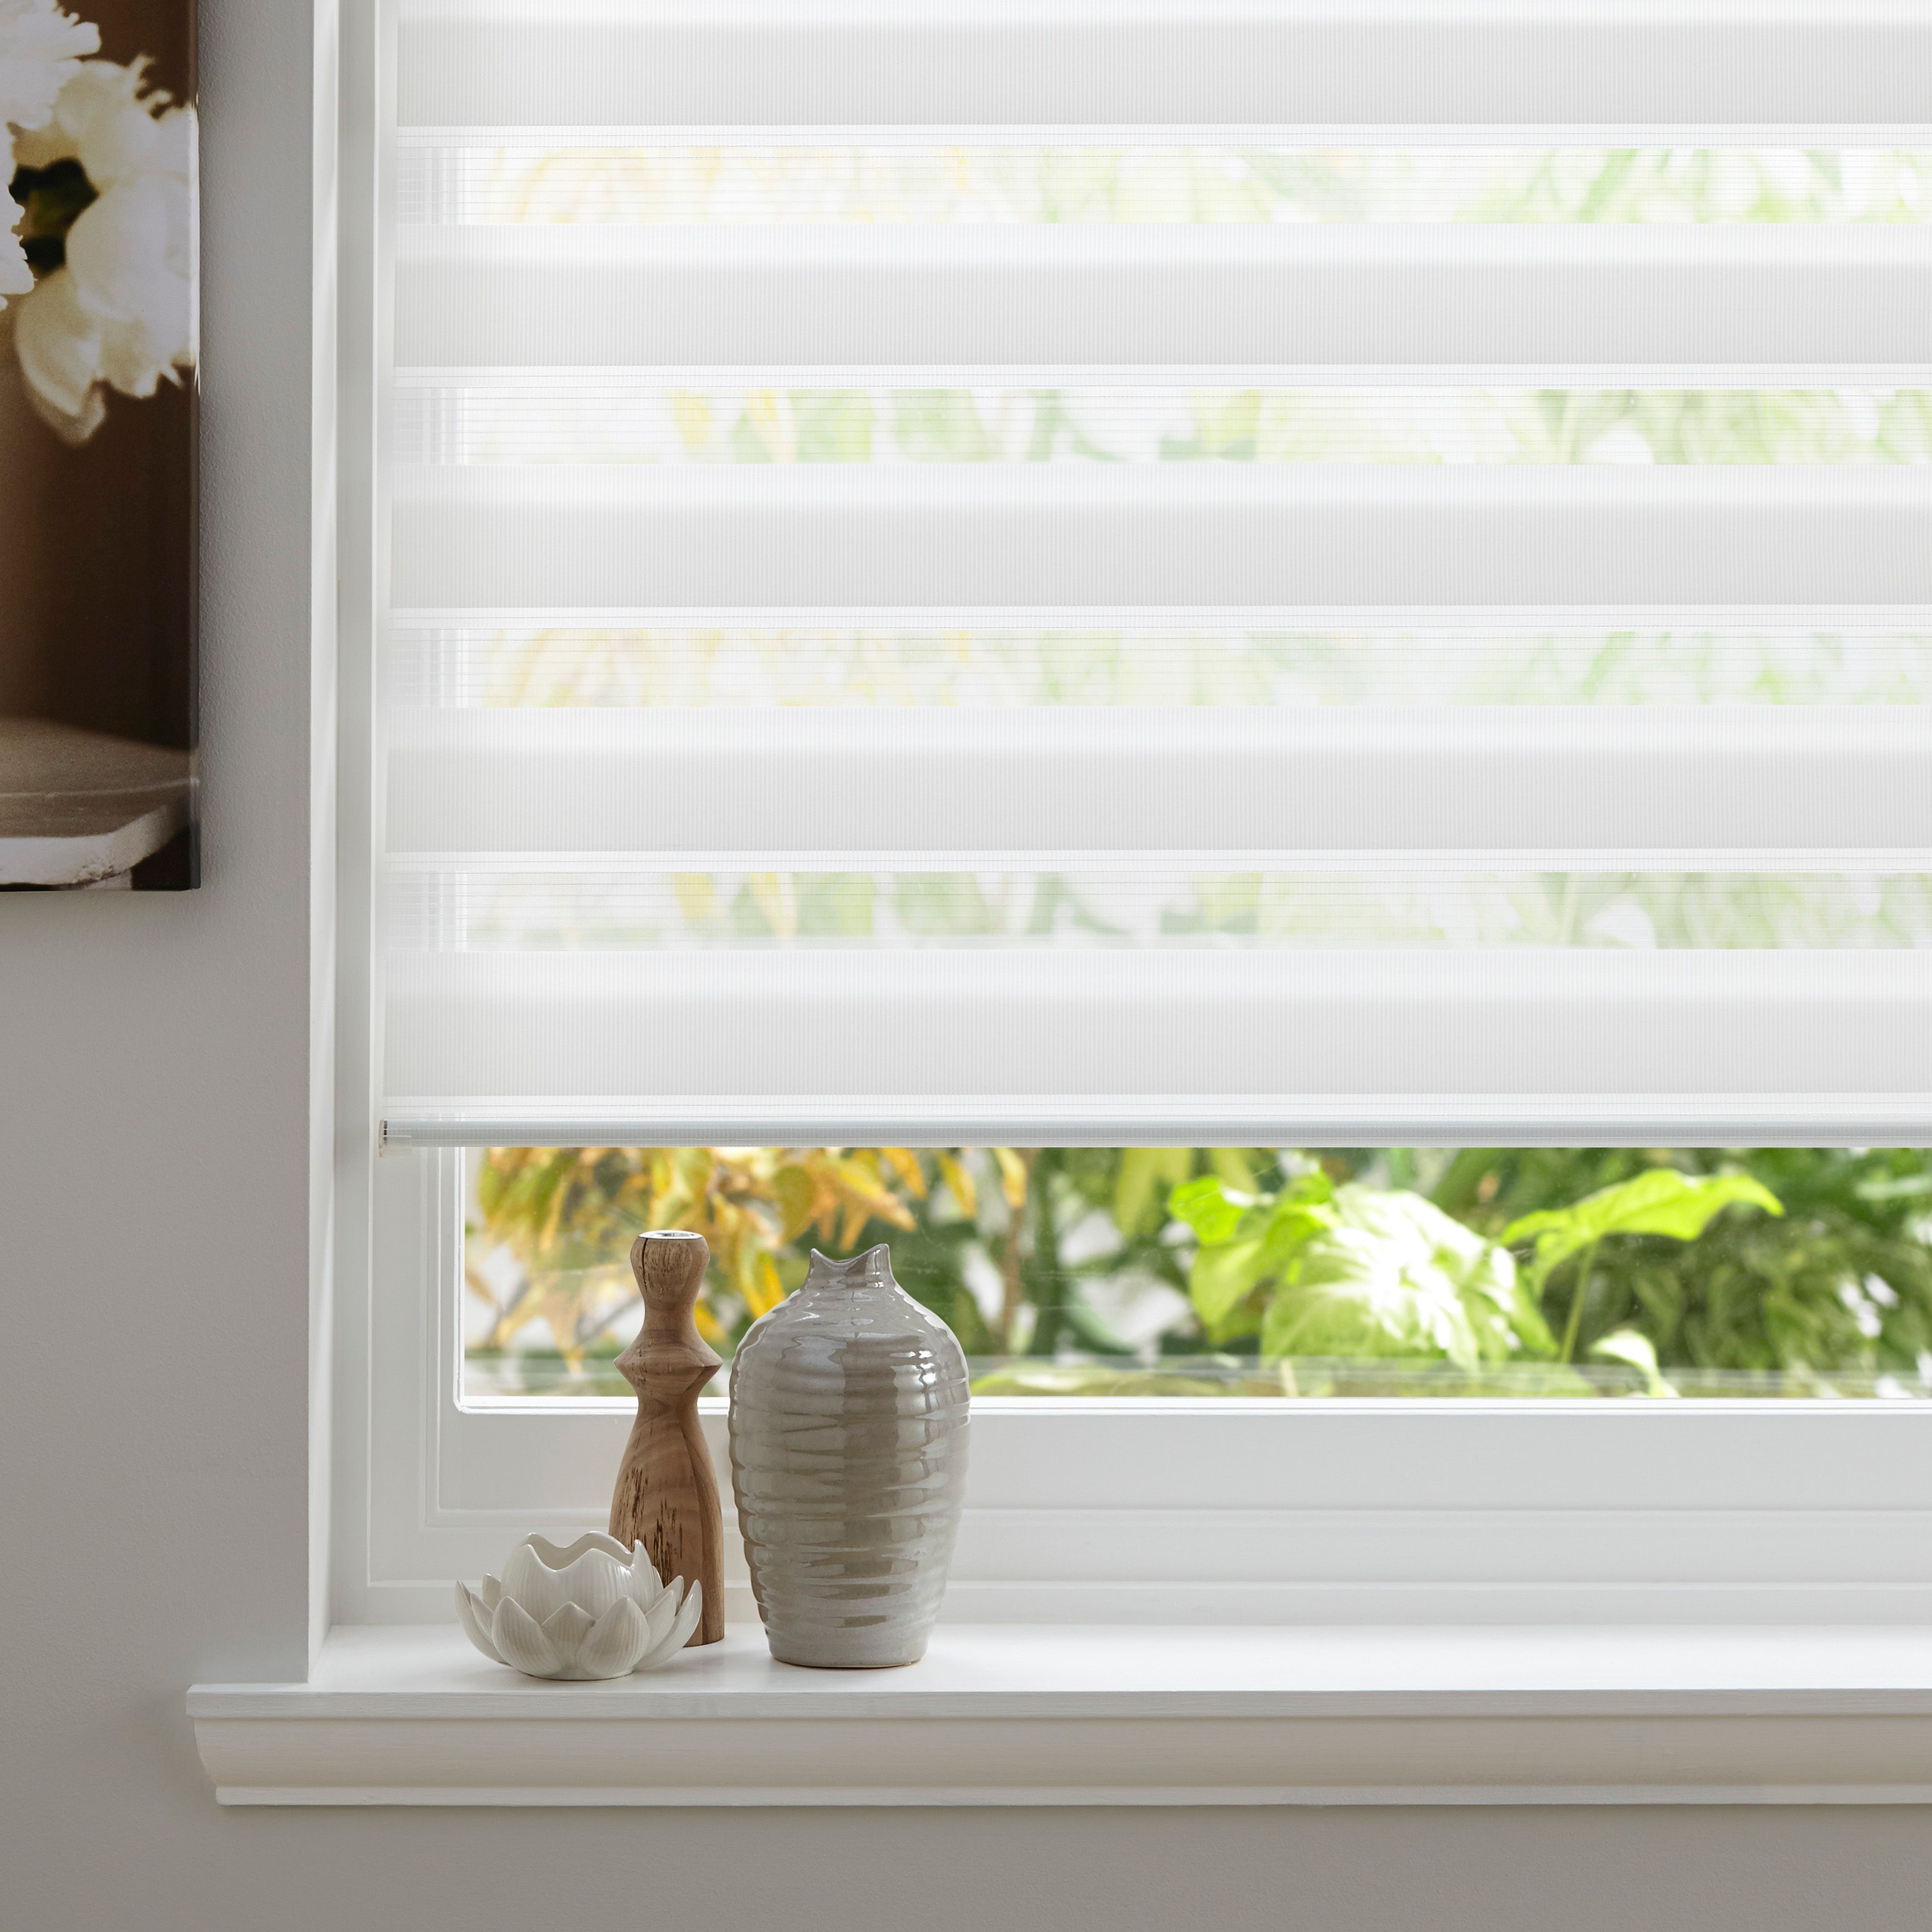 Roller Blinds Our Pick Of The Best Ideal Home Throughout Blue And White Striped Roman Blinds (View 11 of 15)